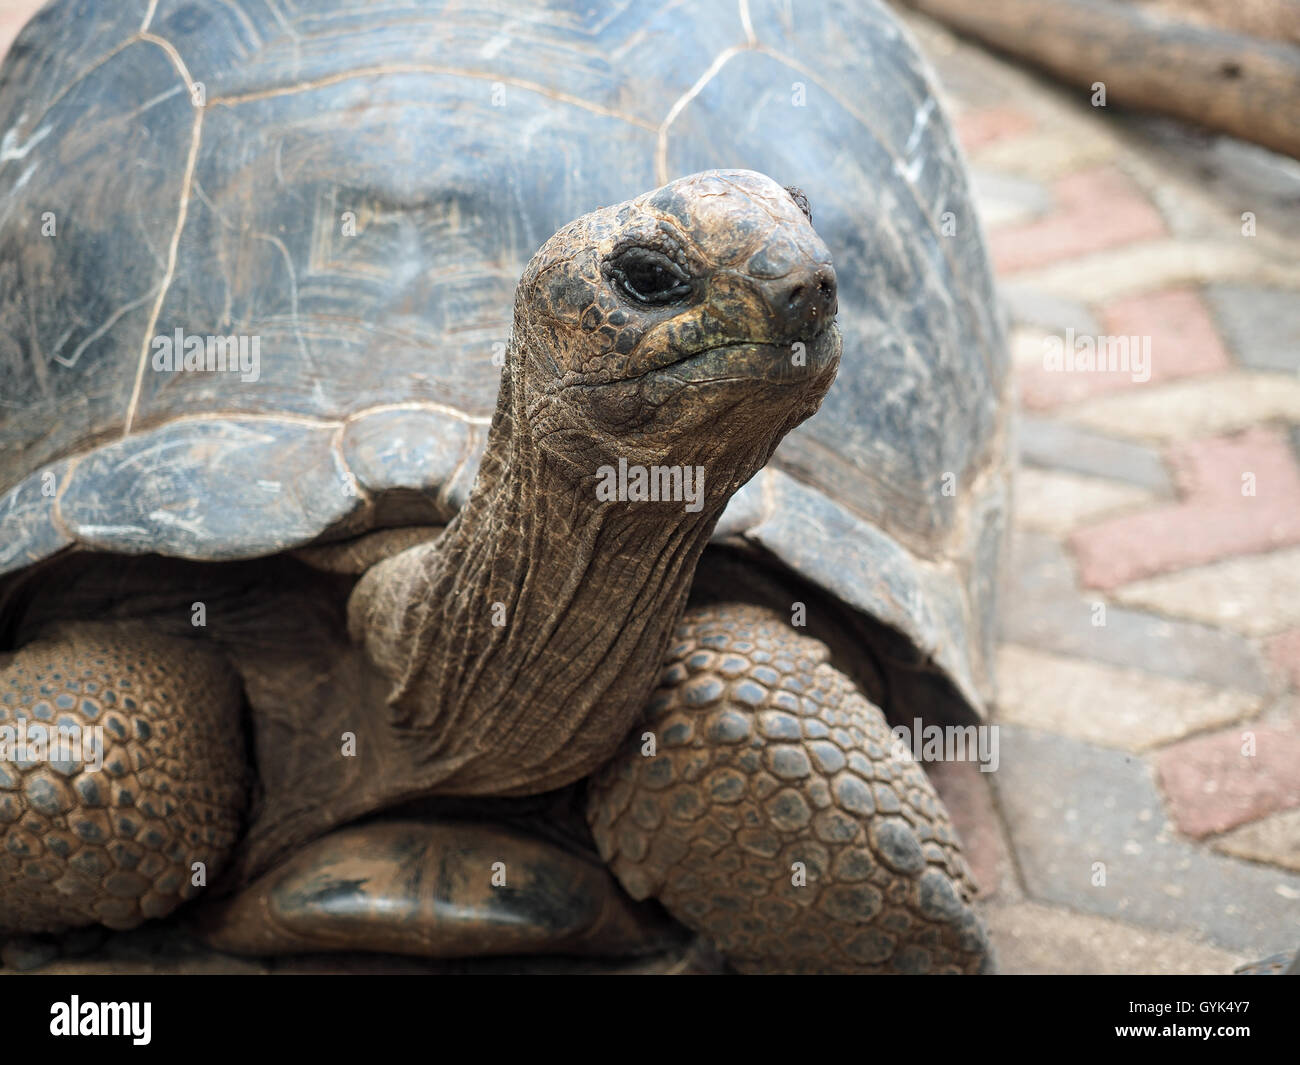 Close up view of the head and face of a Giant Tortoise on the Prison Island of Changuu in Zanzibar Stock Photo